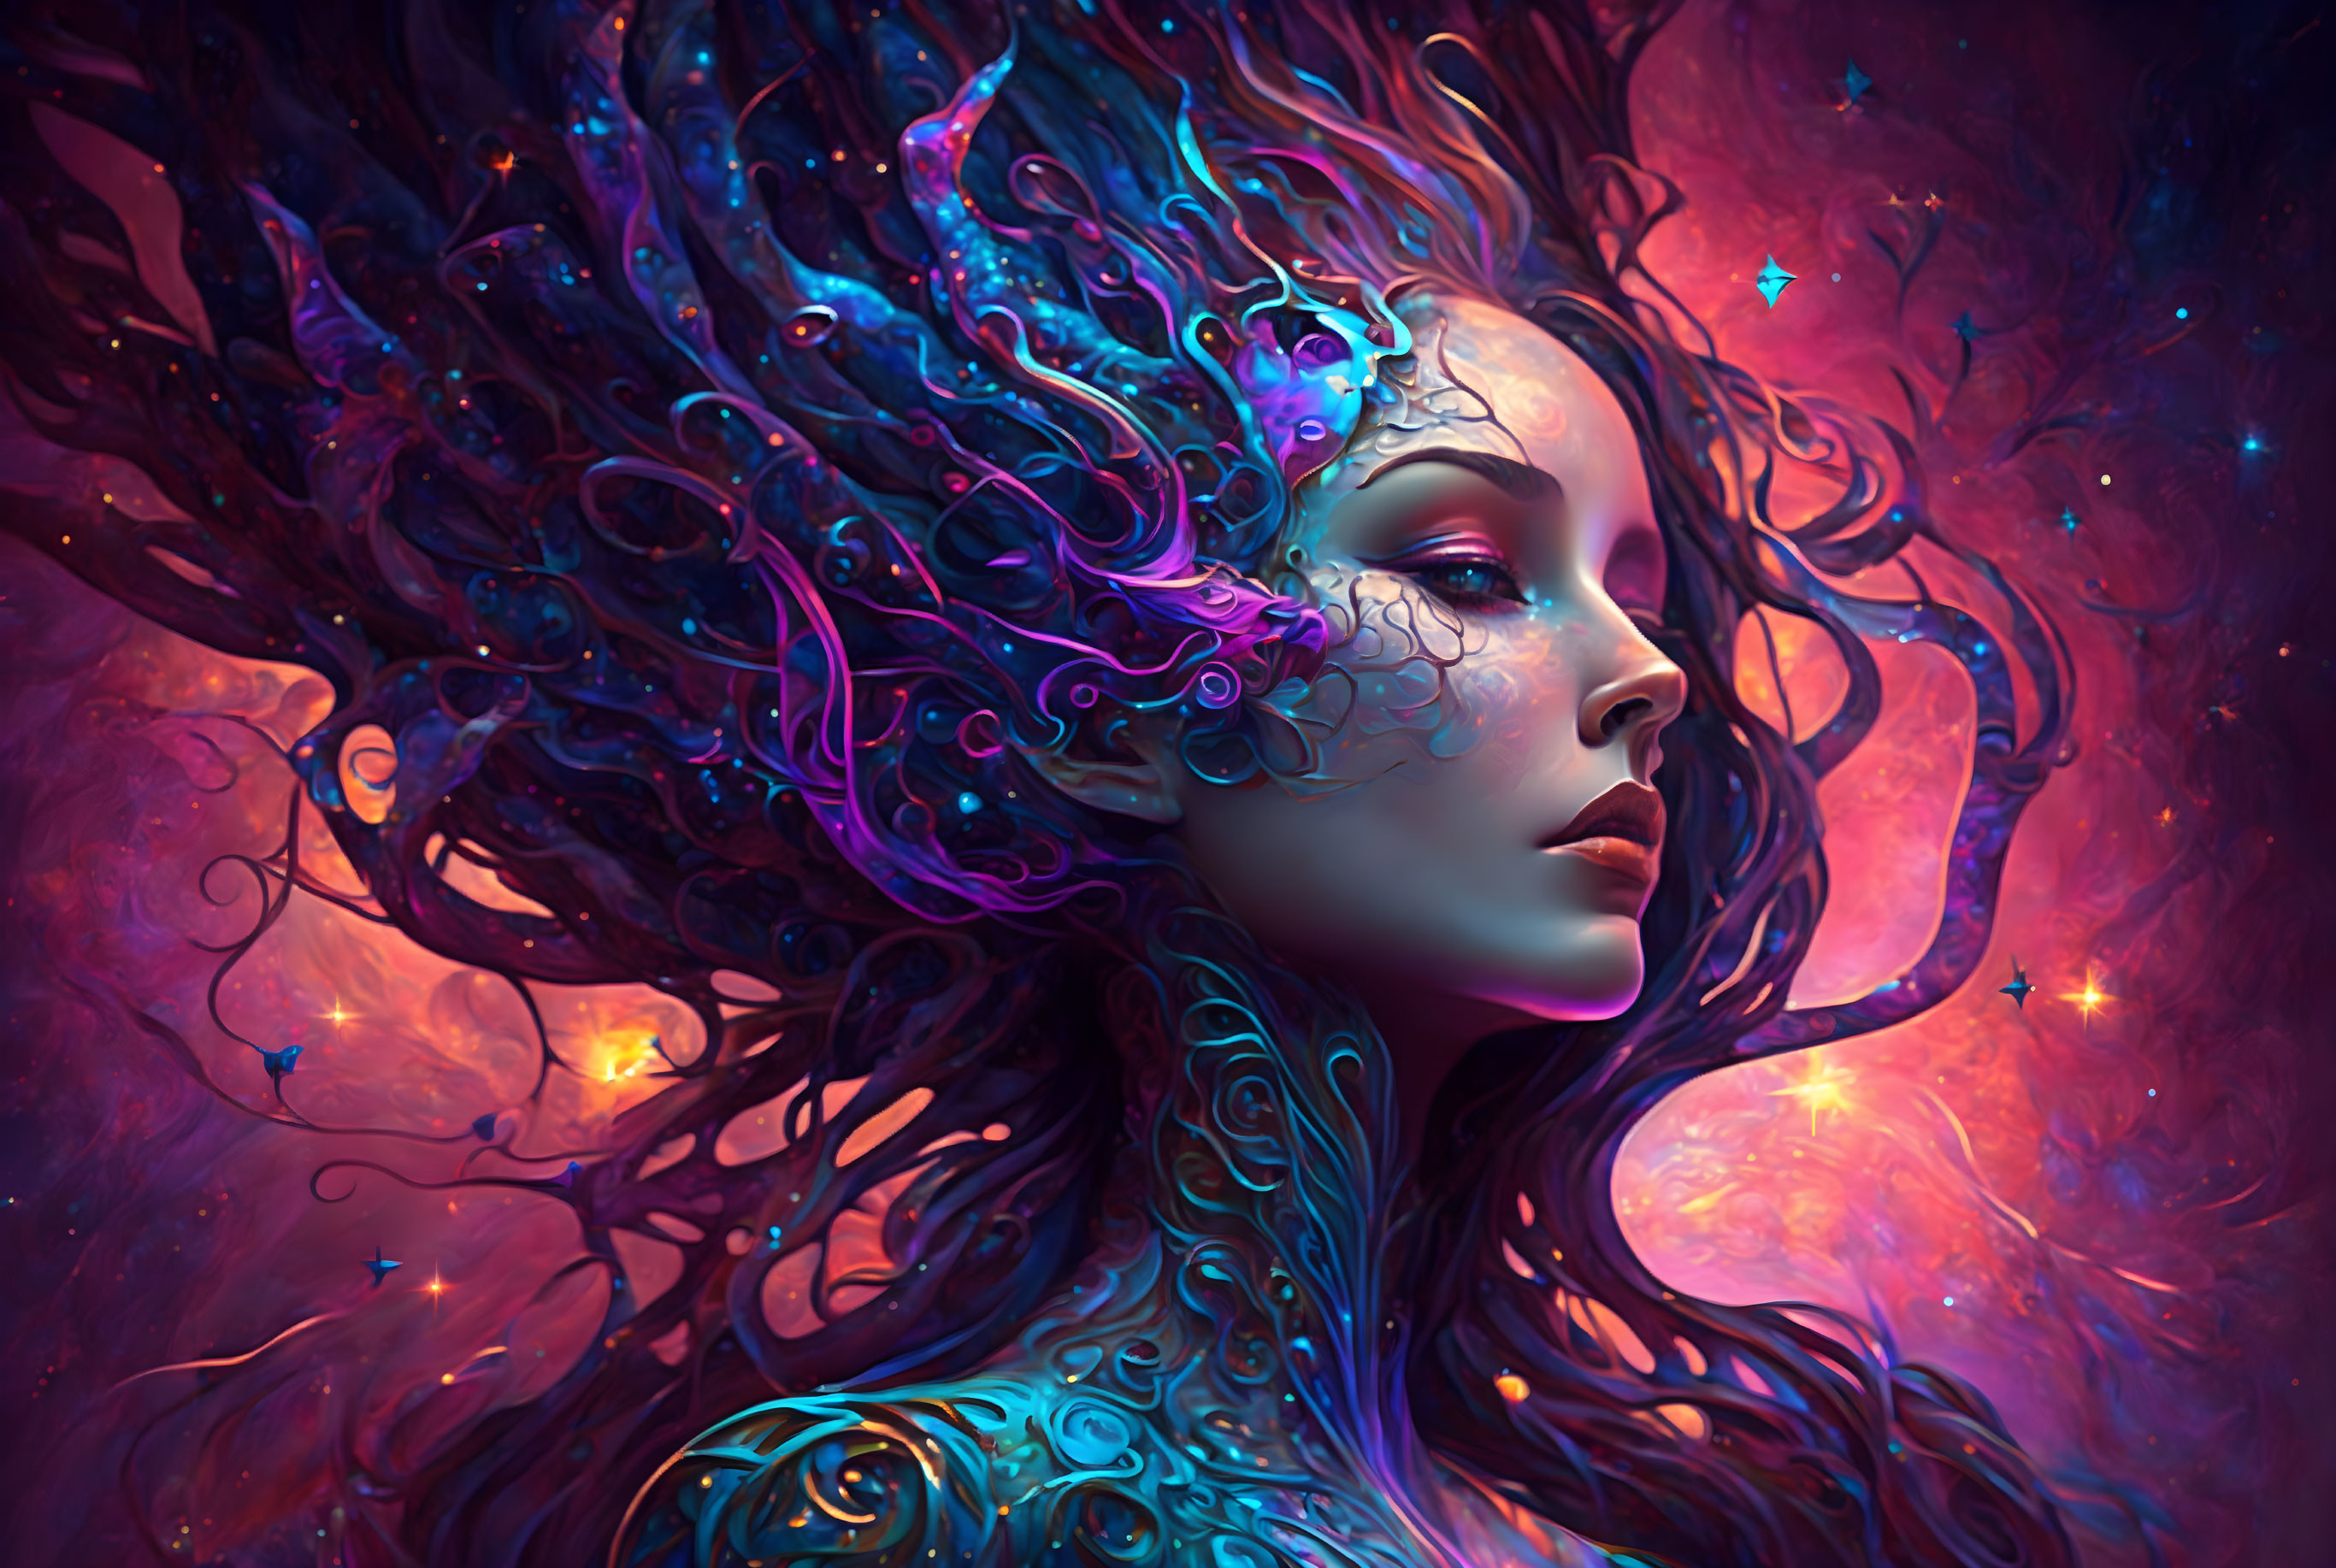 Surreal portrait of woman with flowing hair against cosmic background